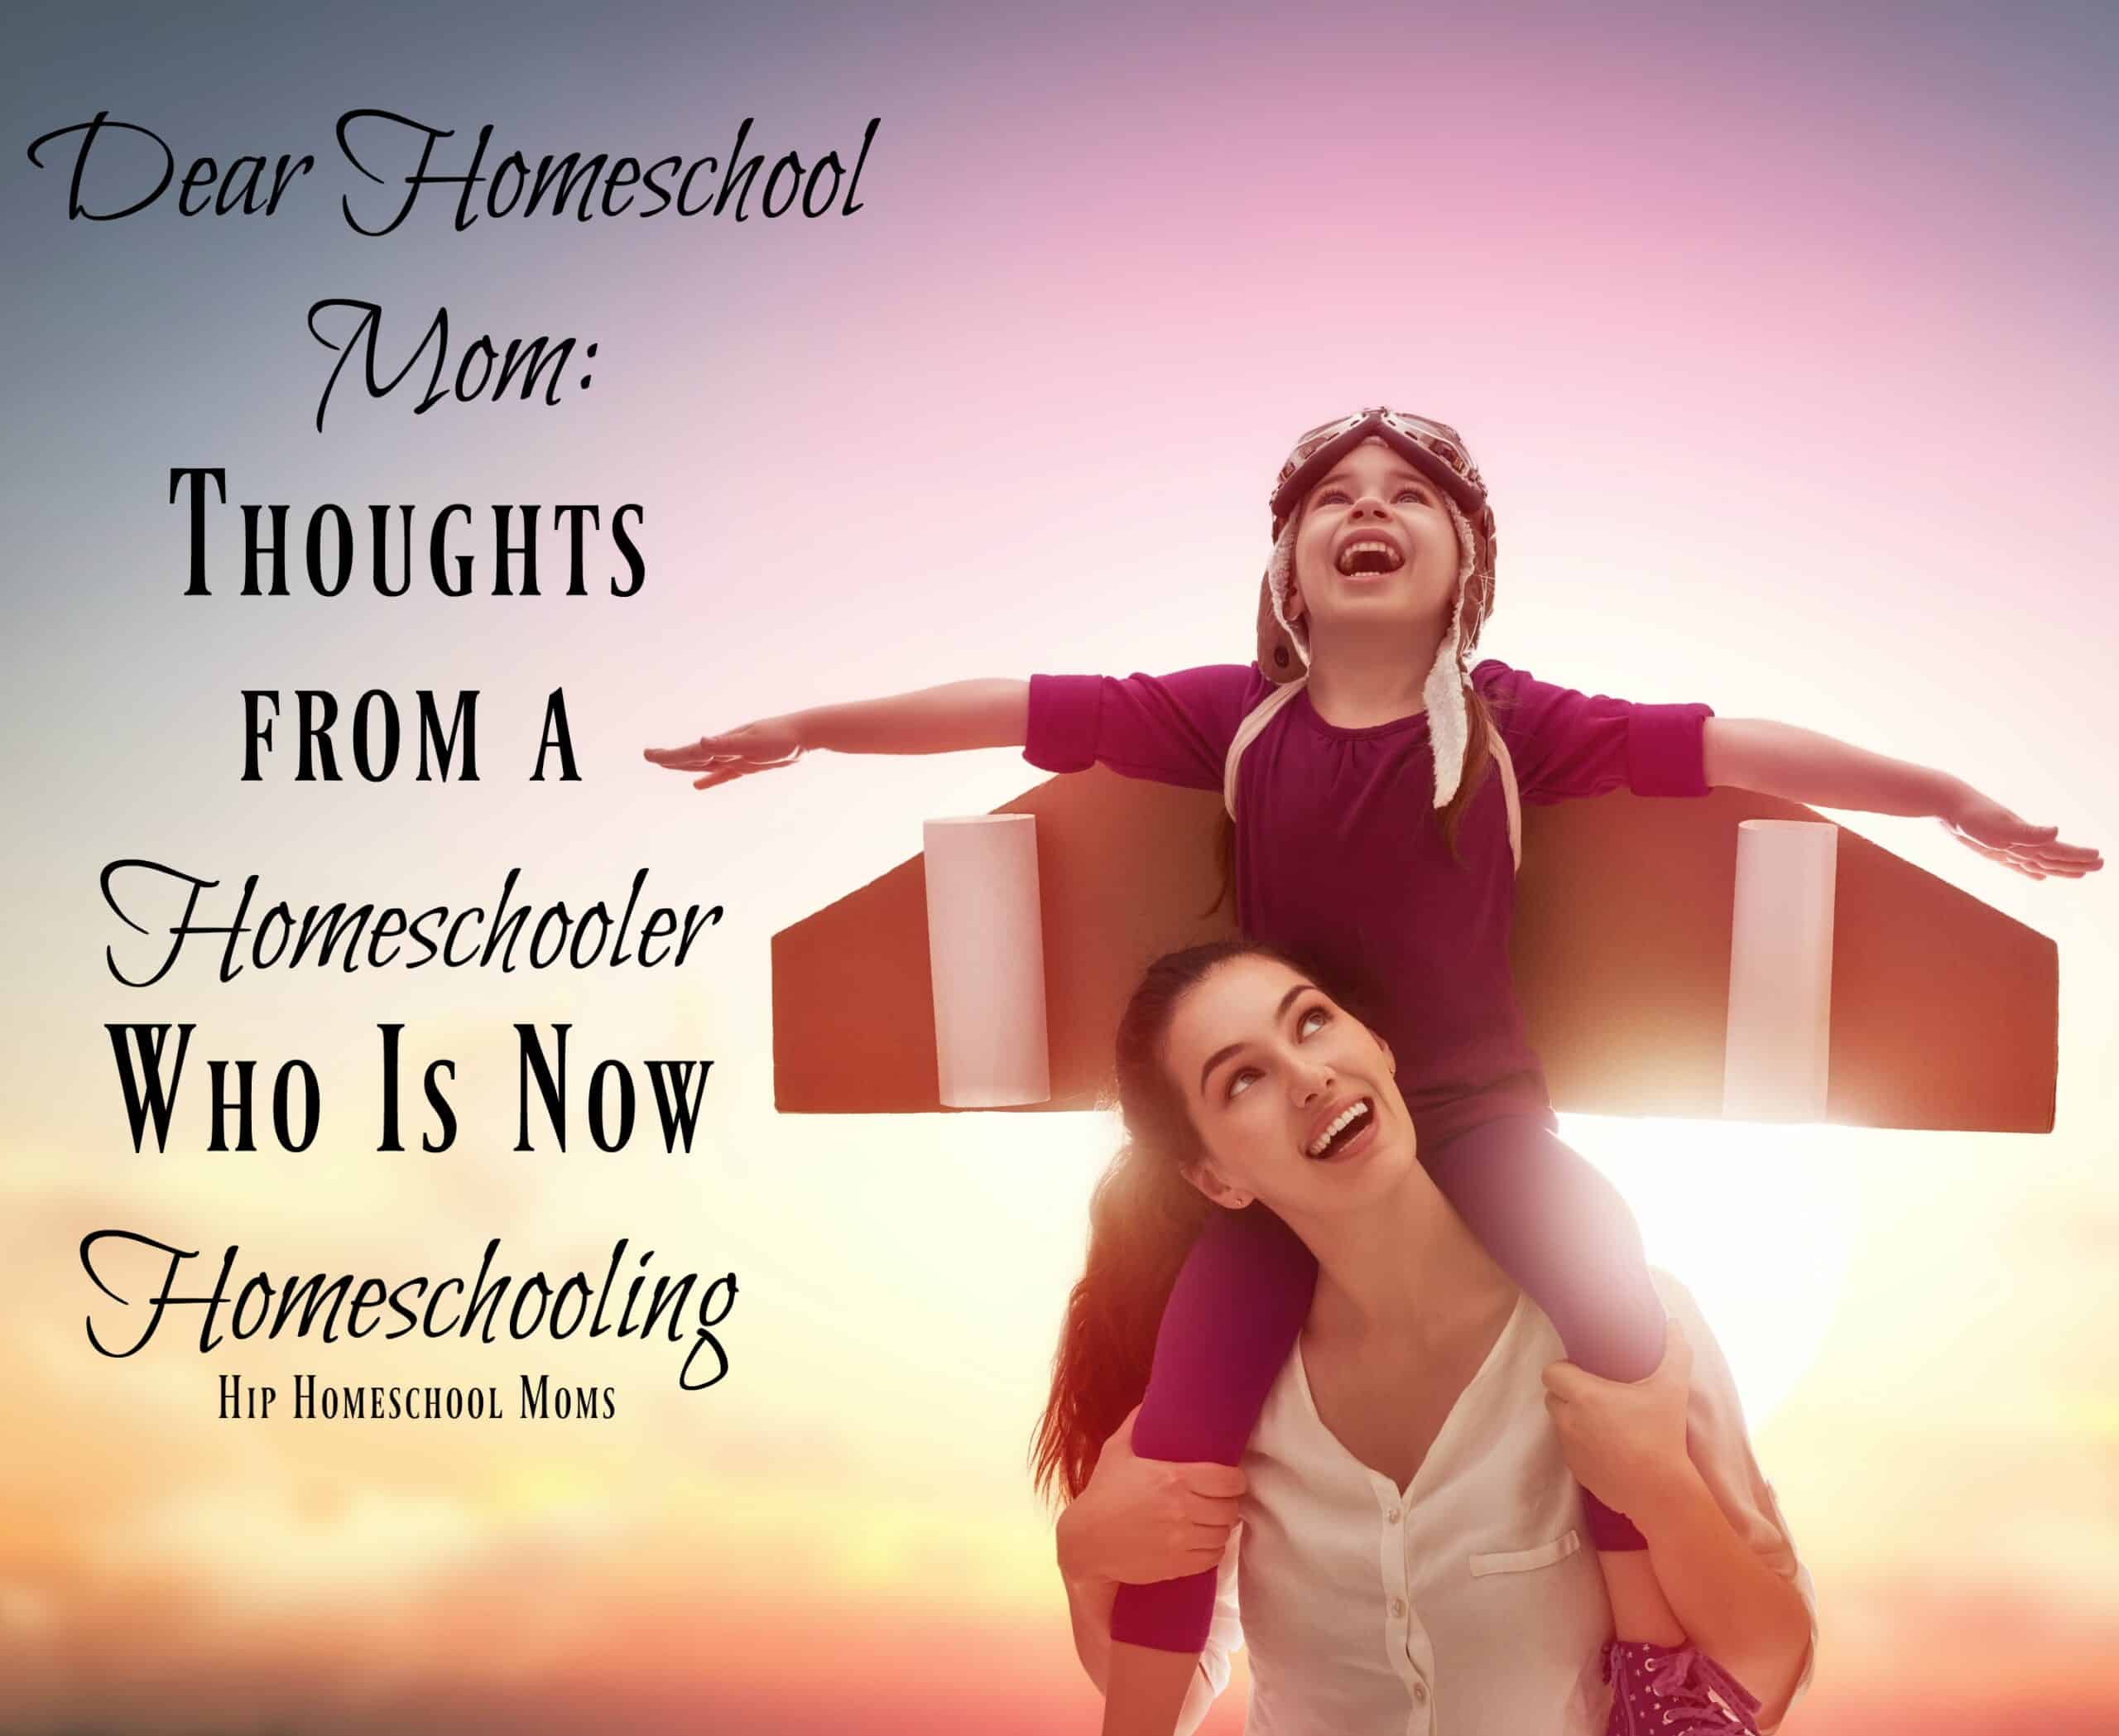 Thoughts from a Homeschooler Who Is Now Homeschooling